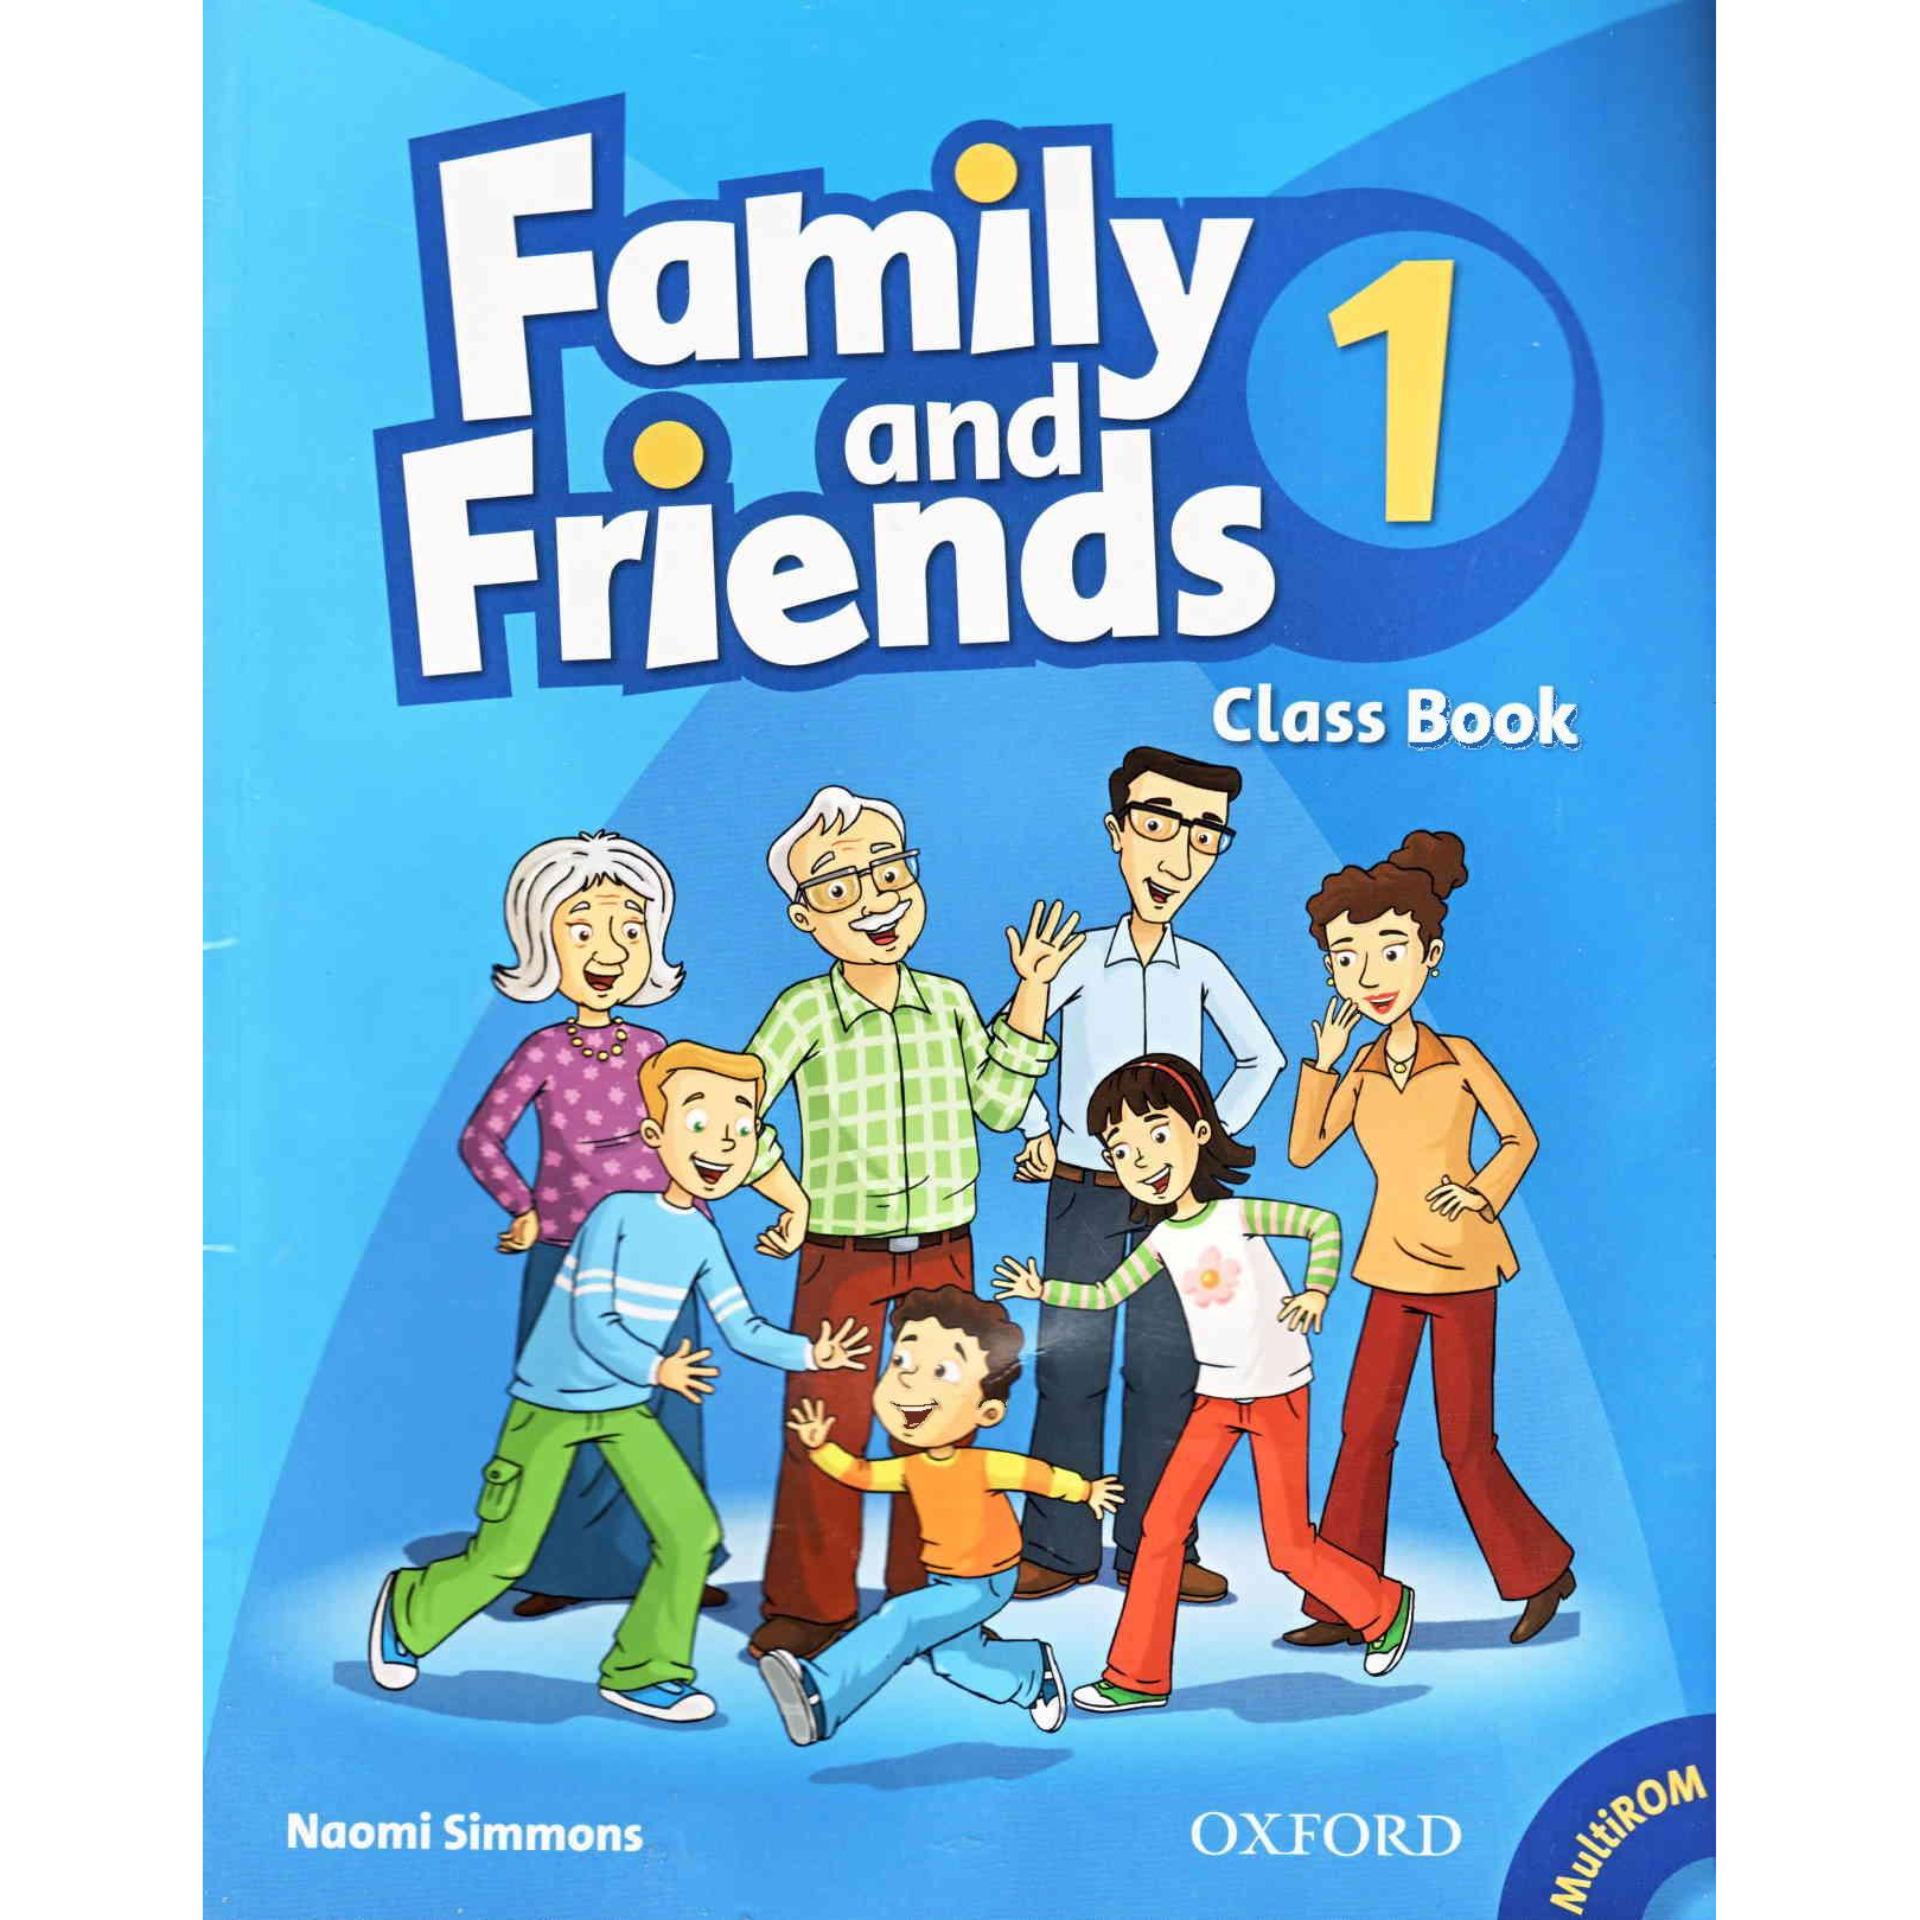 My class book. Family English учебник. Английский язык Family and friends 2. Фэмили энд френдс 1. Family and friends 2 класс.